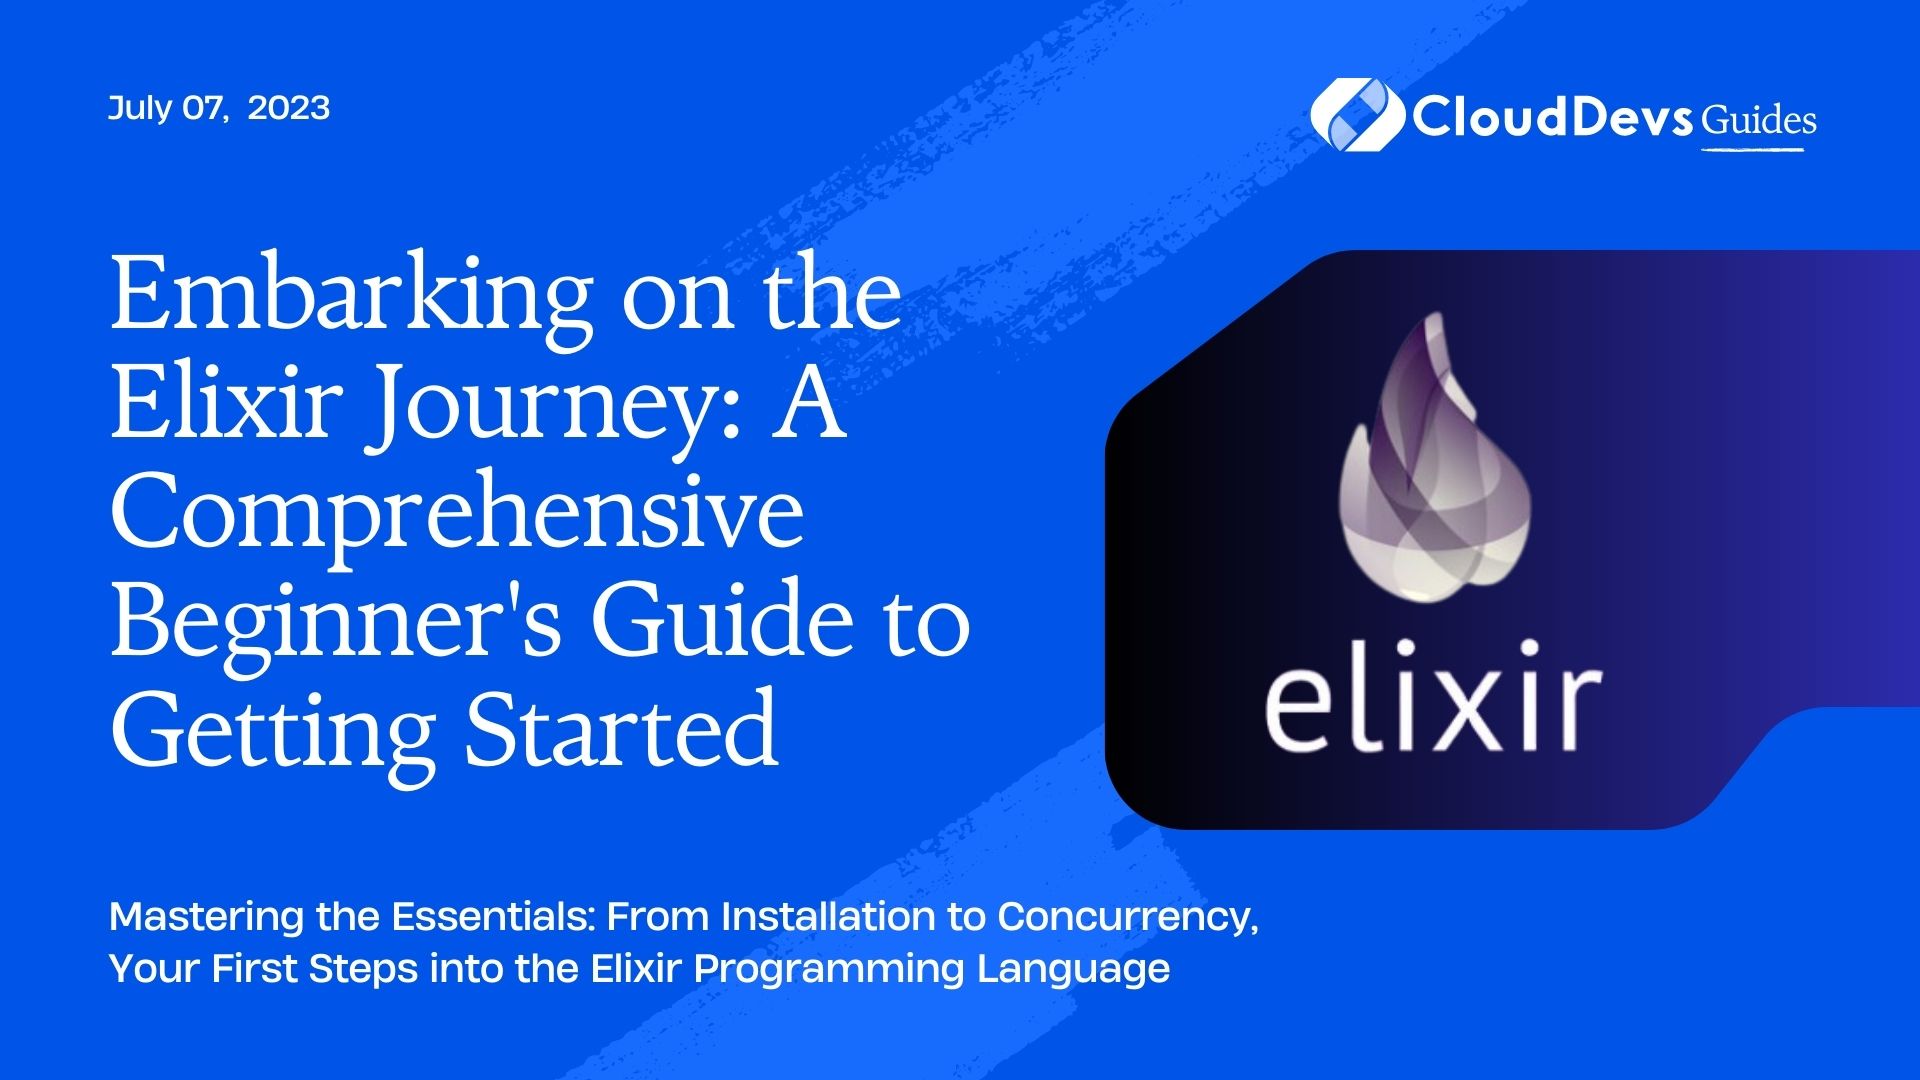 Embarking on the Elixir Journey: A Comprehensive Beginner's Guide to Getting Started